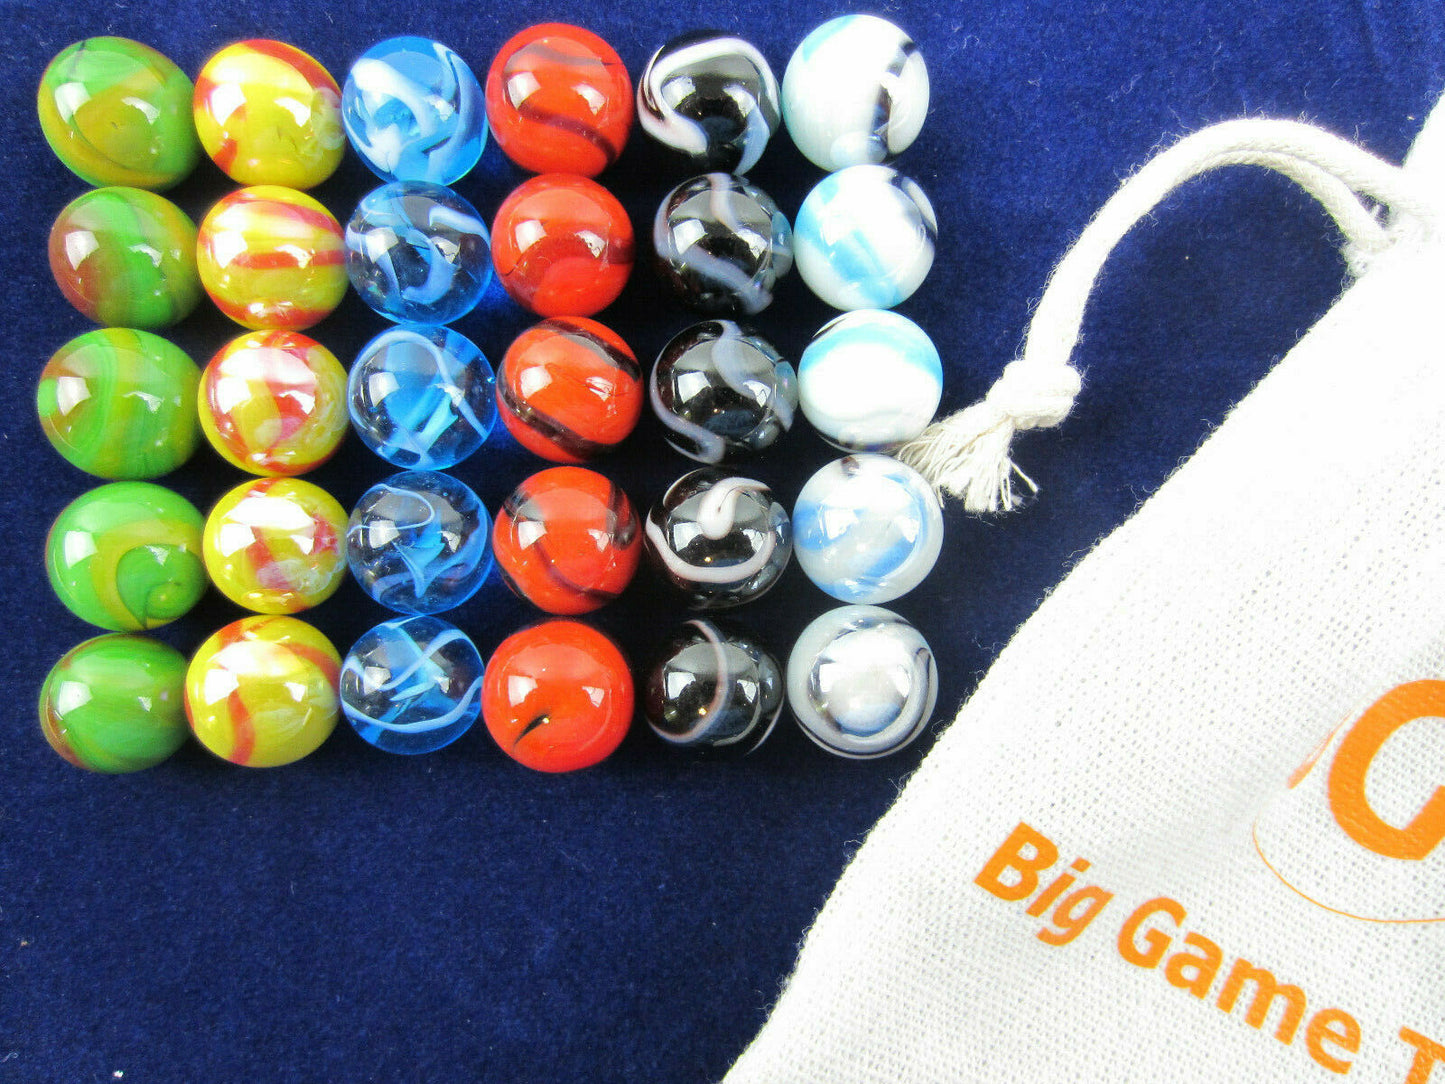 Big Game Toys 30pc Deluxe 16mm Glass Replacement Marbles